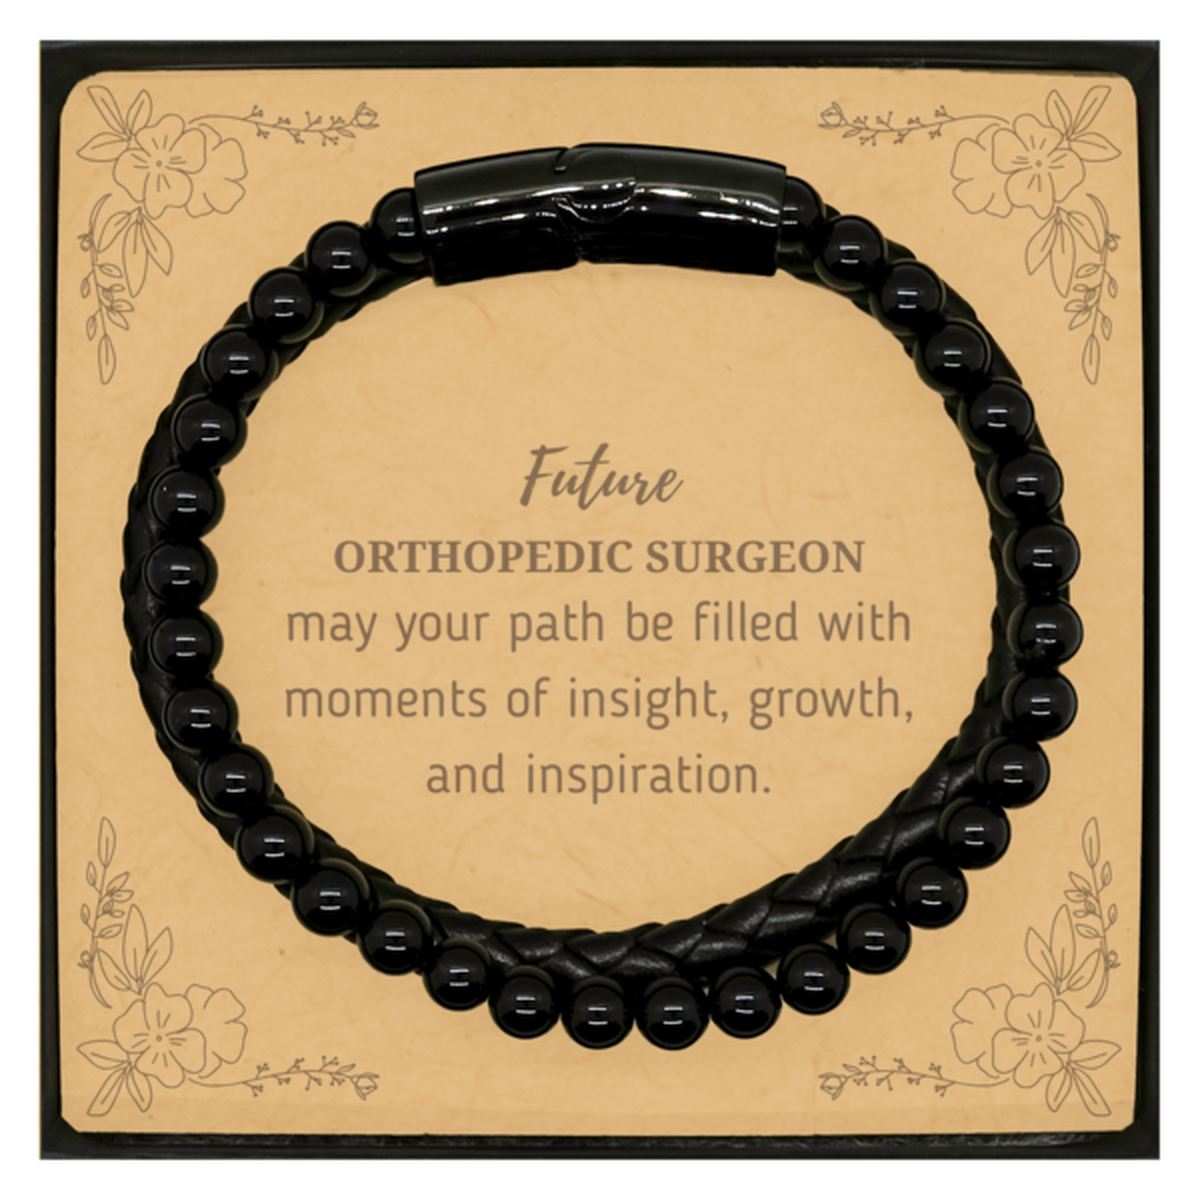 Future Orthopedic Surgeon Gifts, May your path be filled with moments of insight, Graduation Gifts for New Orthopedic Surgeon, Christmas Unique Stone Leather Bracelets For Men, Women, Friends